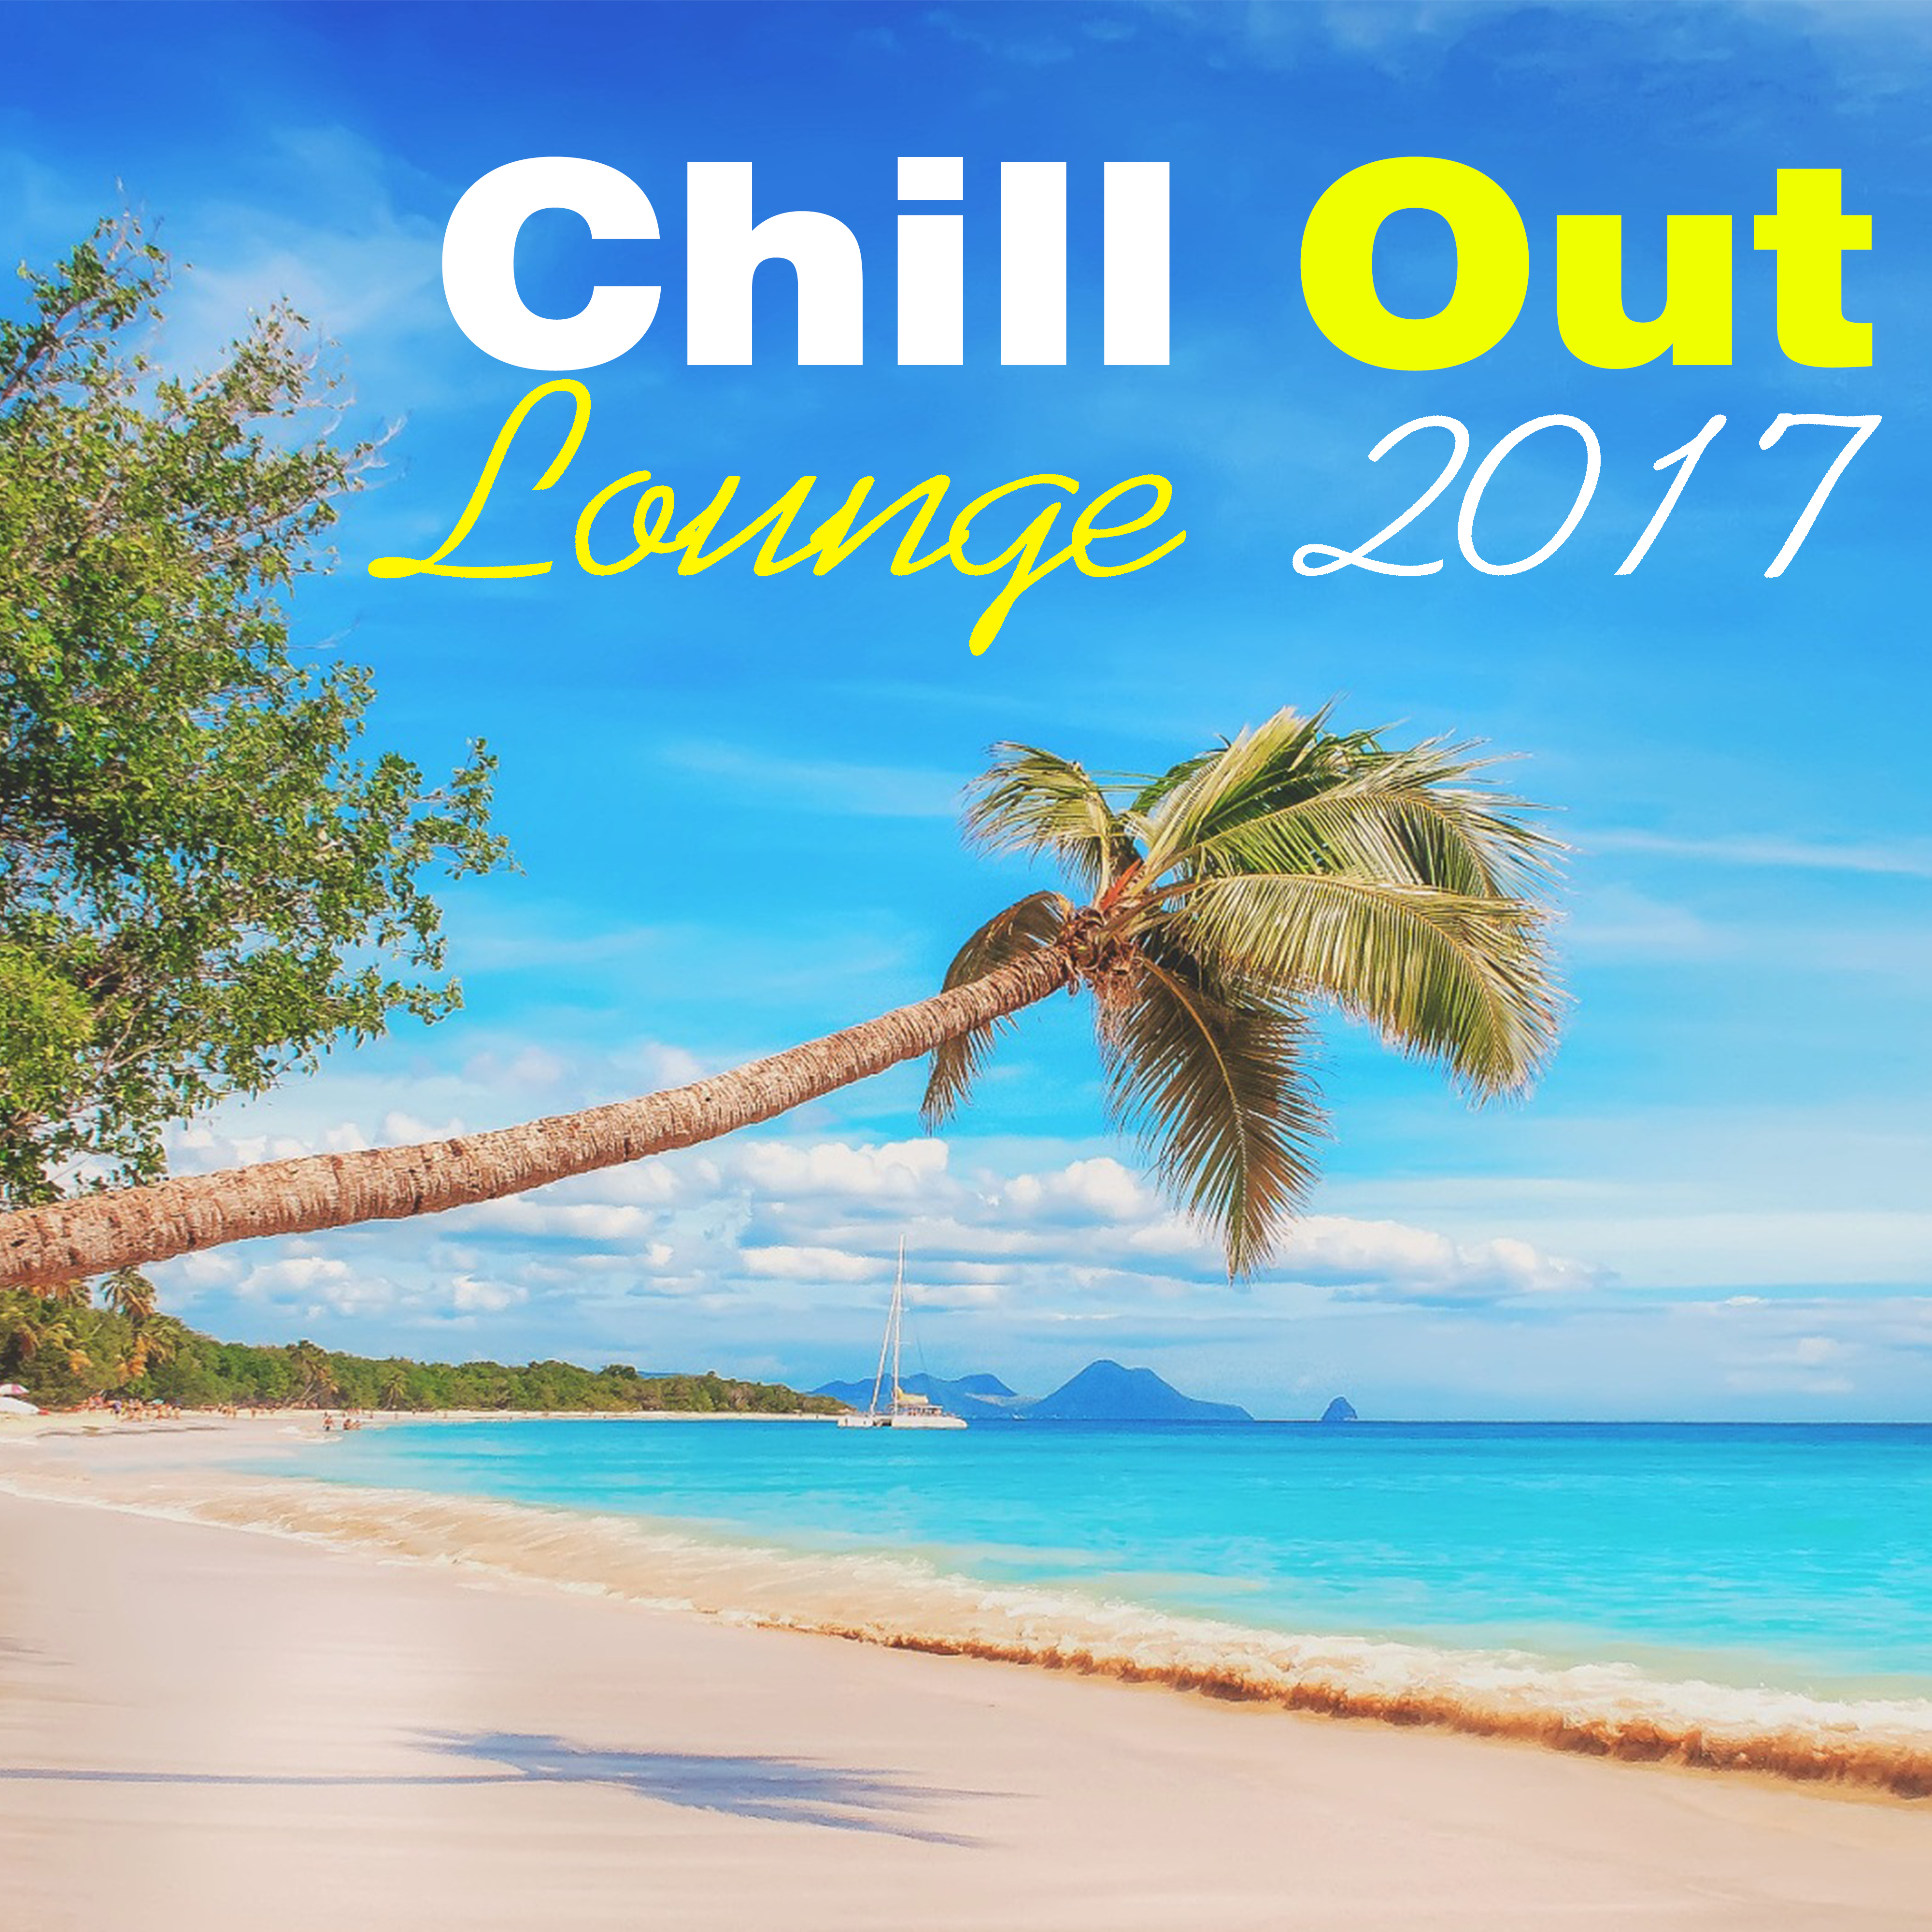 Chill Out Lounge 2017 – Fresh Chill Out Beats, Summer Hits, Chill Out 2017, Pure Electronic Music